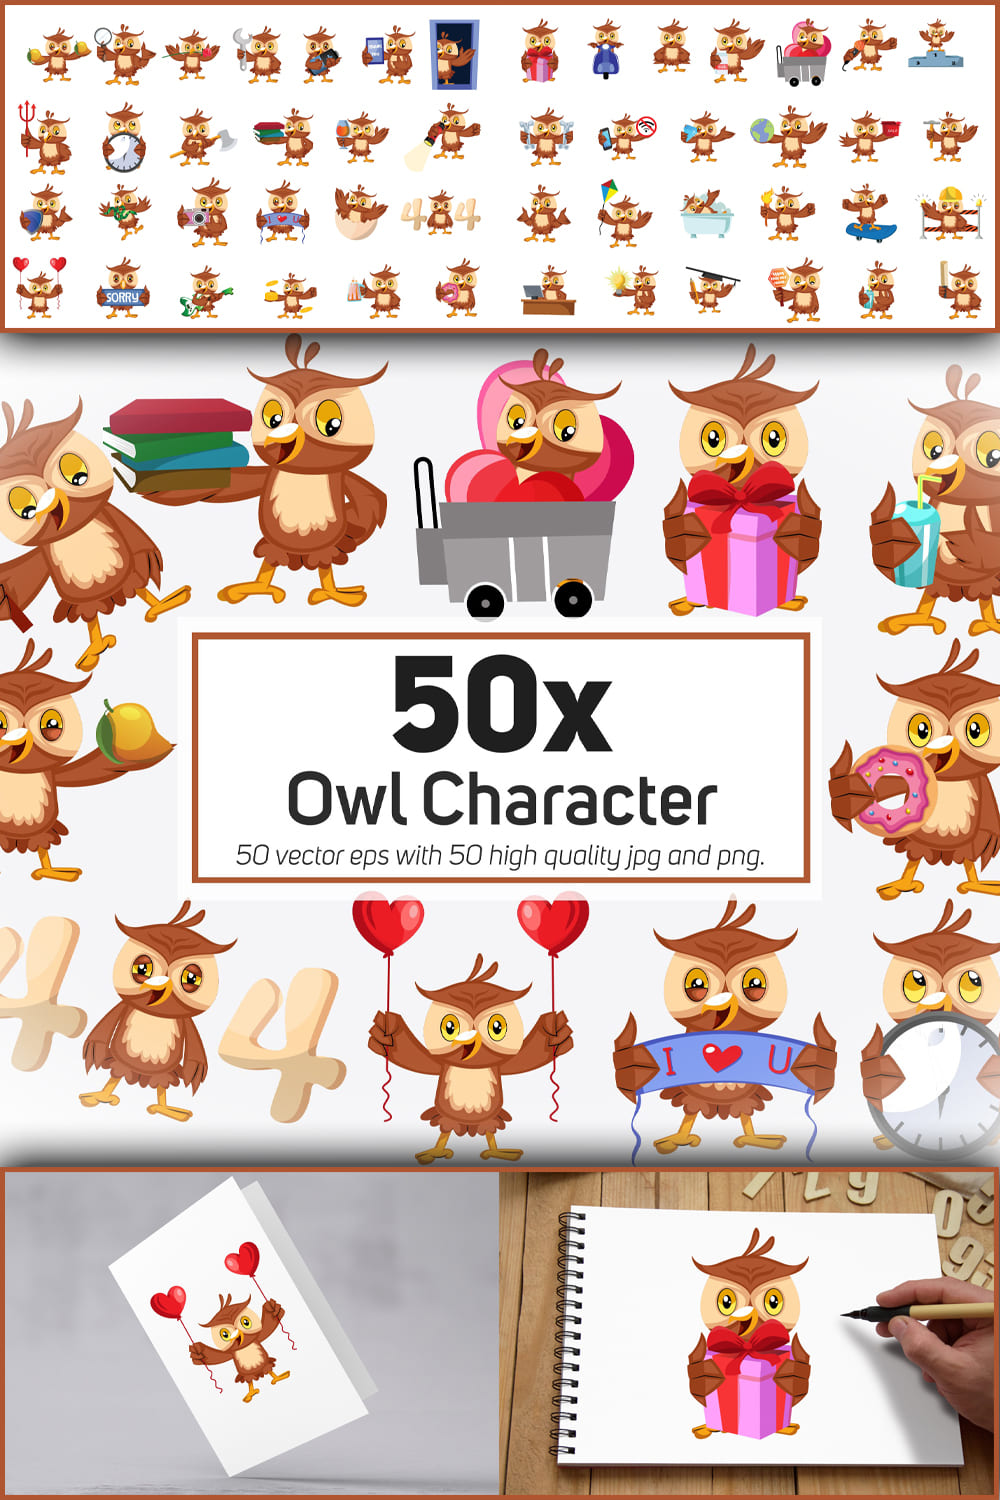 542192 50x owl character and mascot collection illustrati pinterest 1000 1500 329